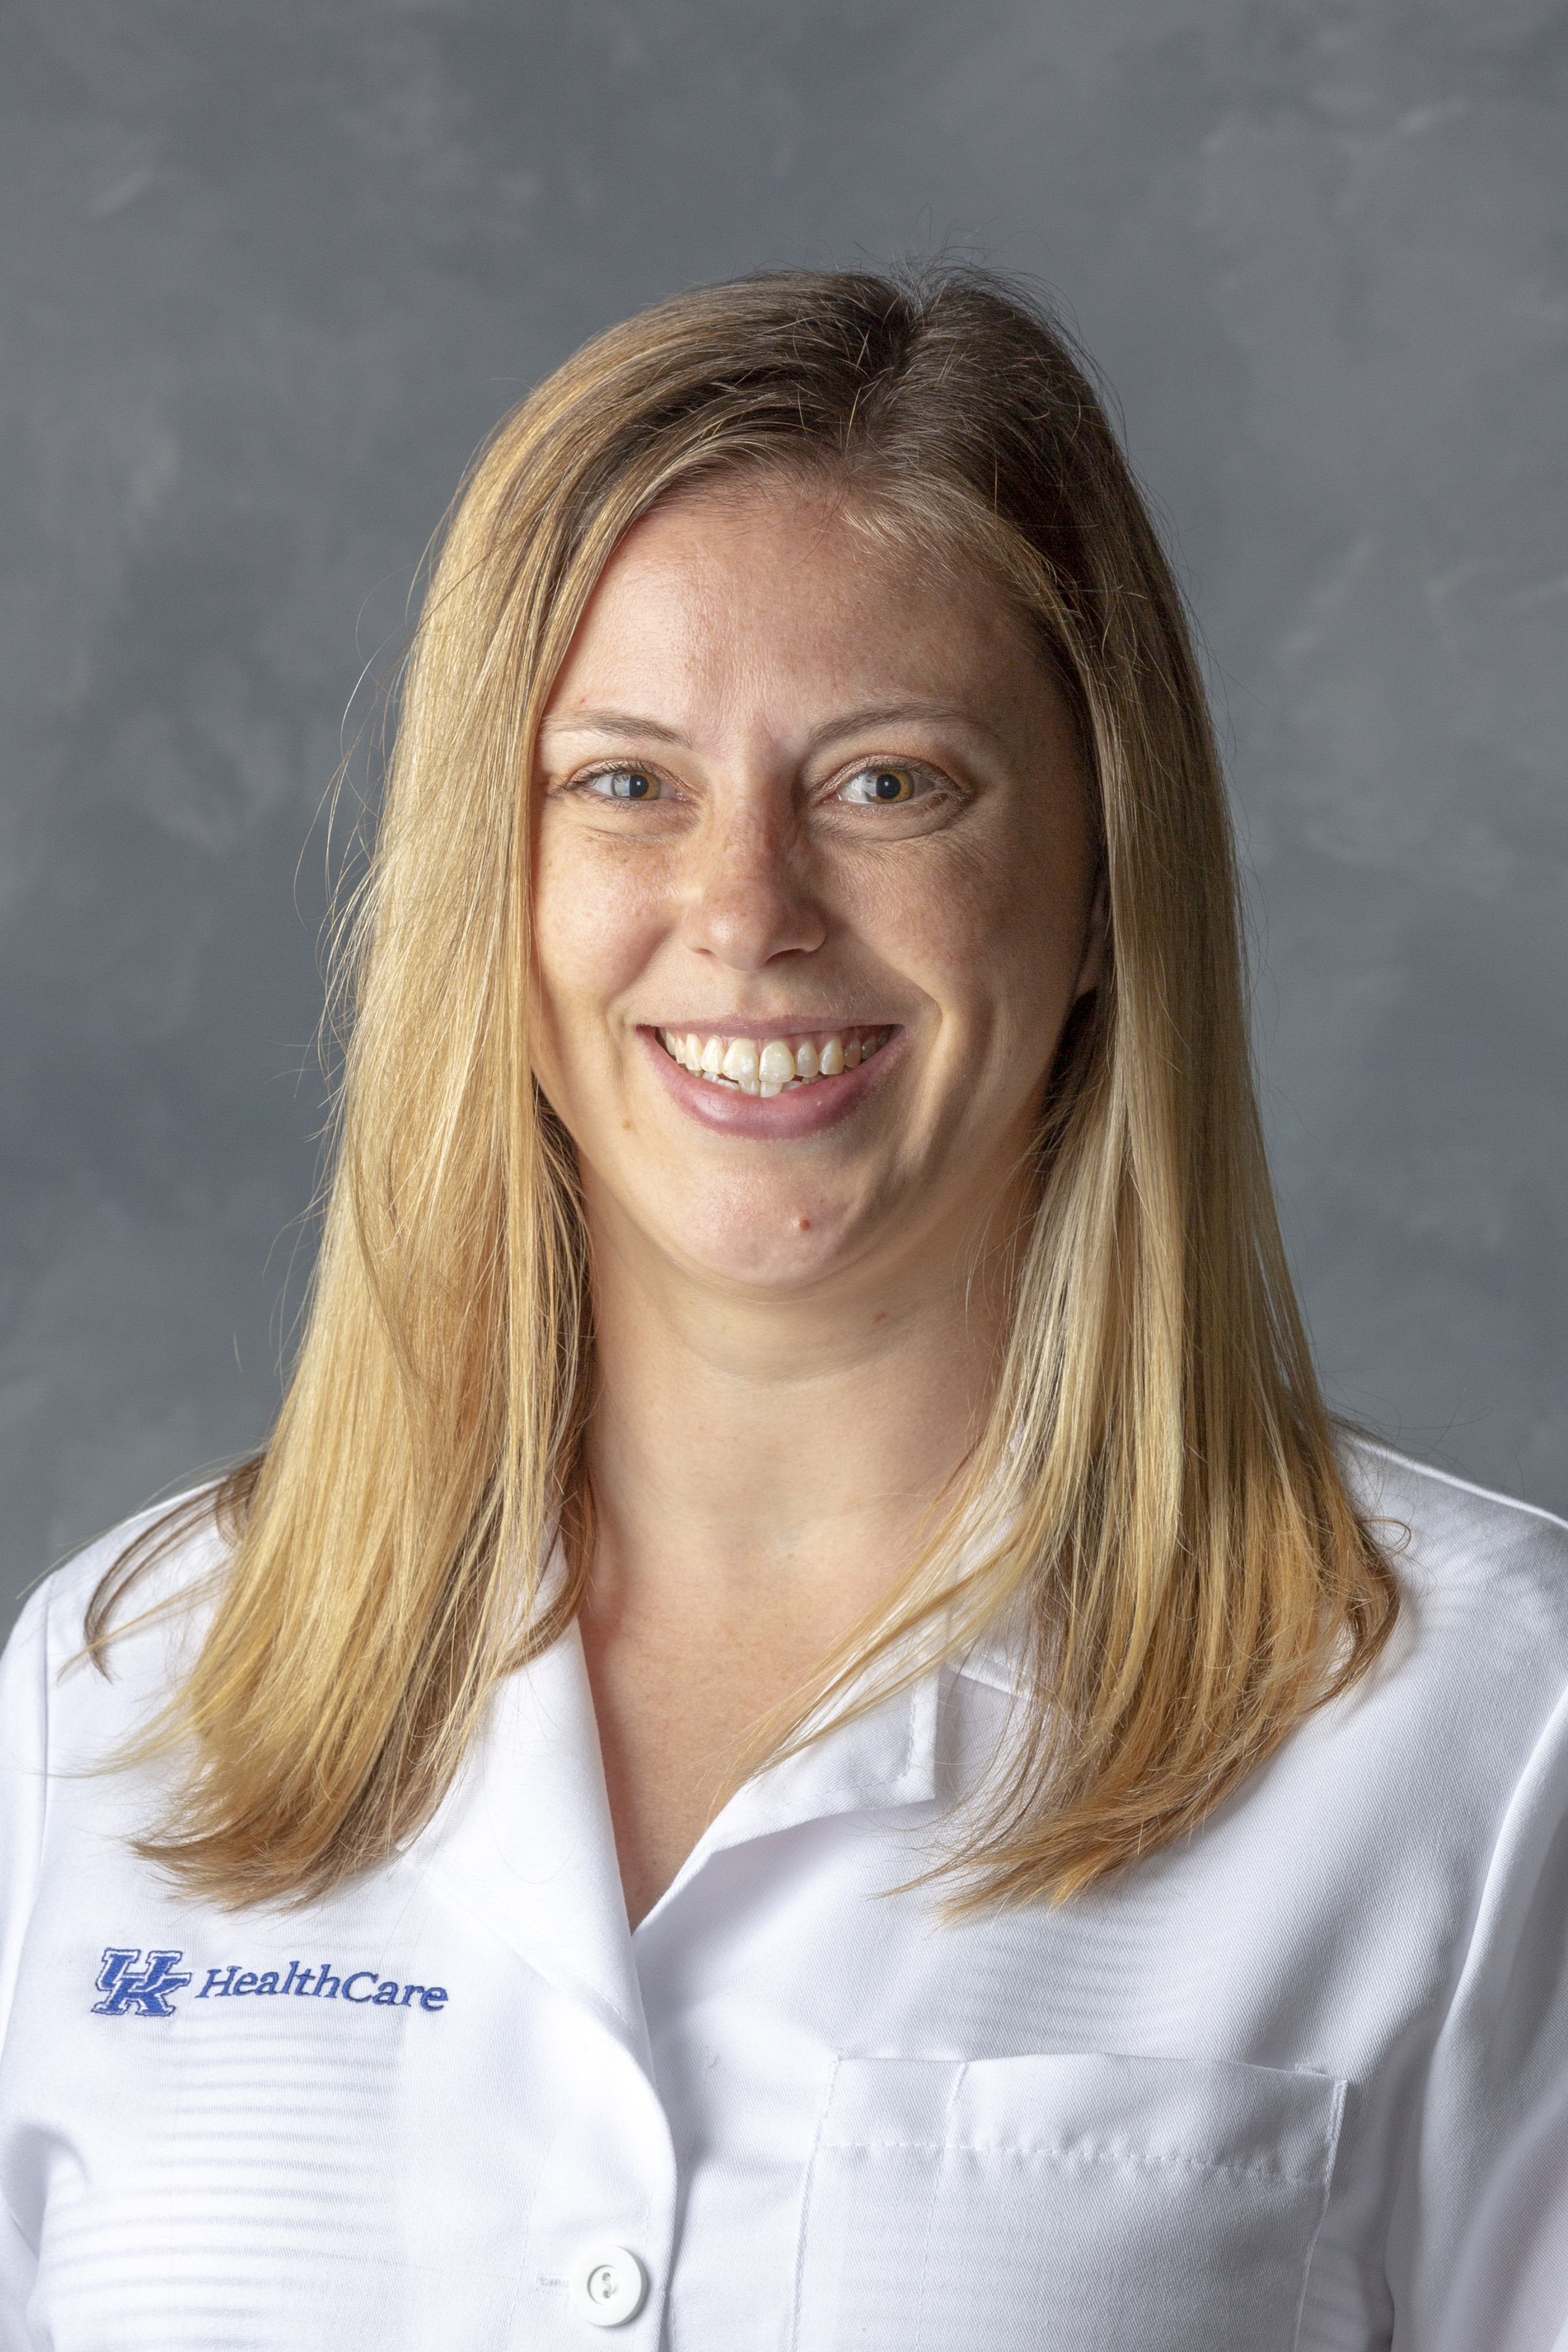 Head shot of June Resident of the Month, Dr. Leslie McHale